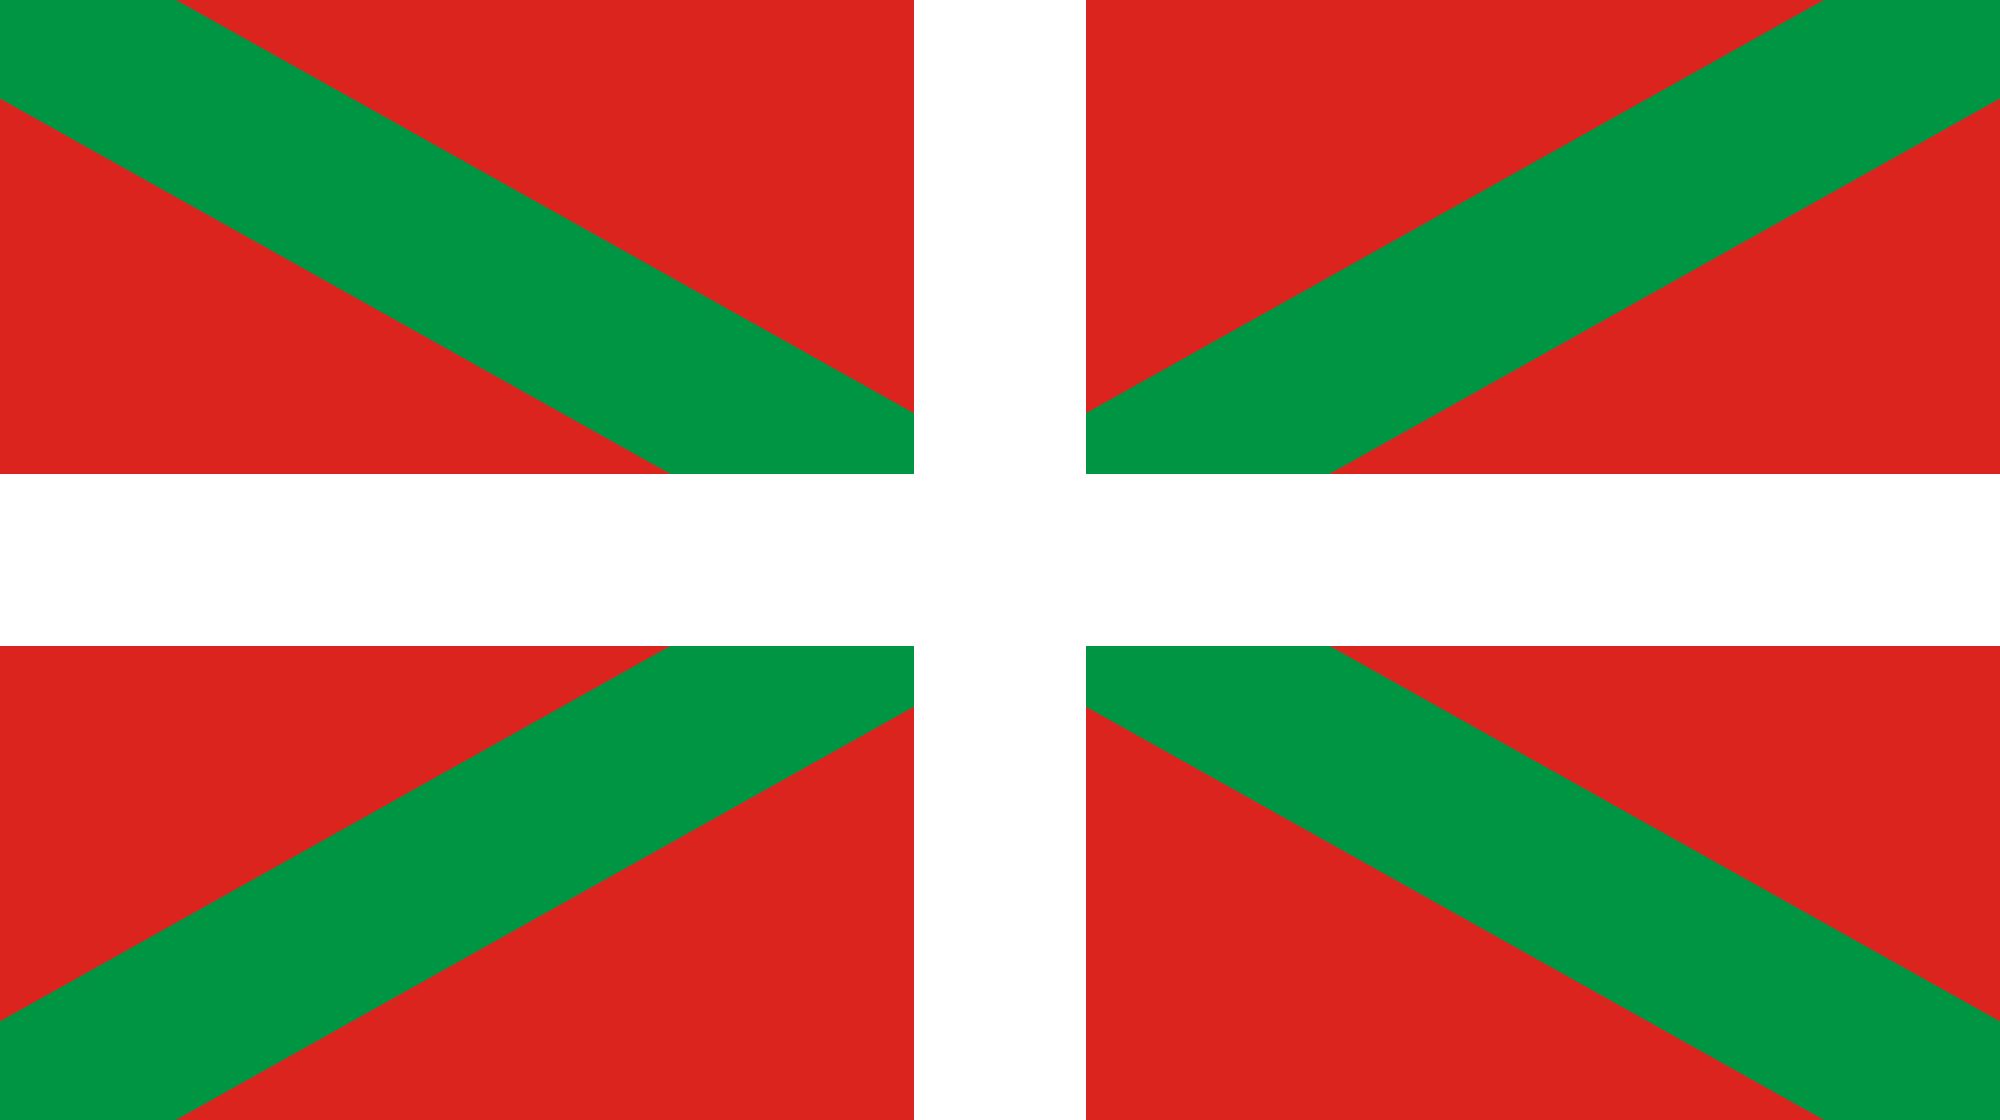 Flag_of_the_Basque_Country.svg